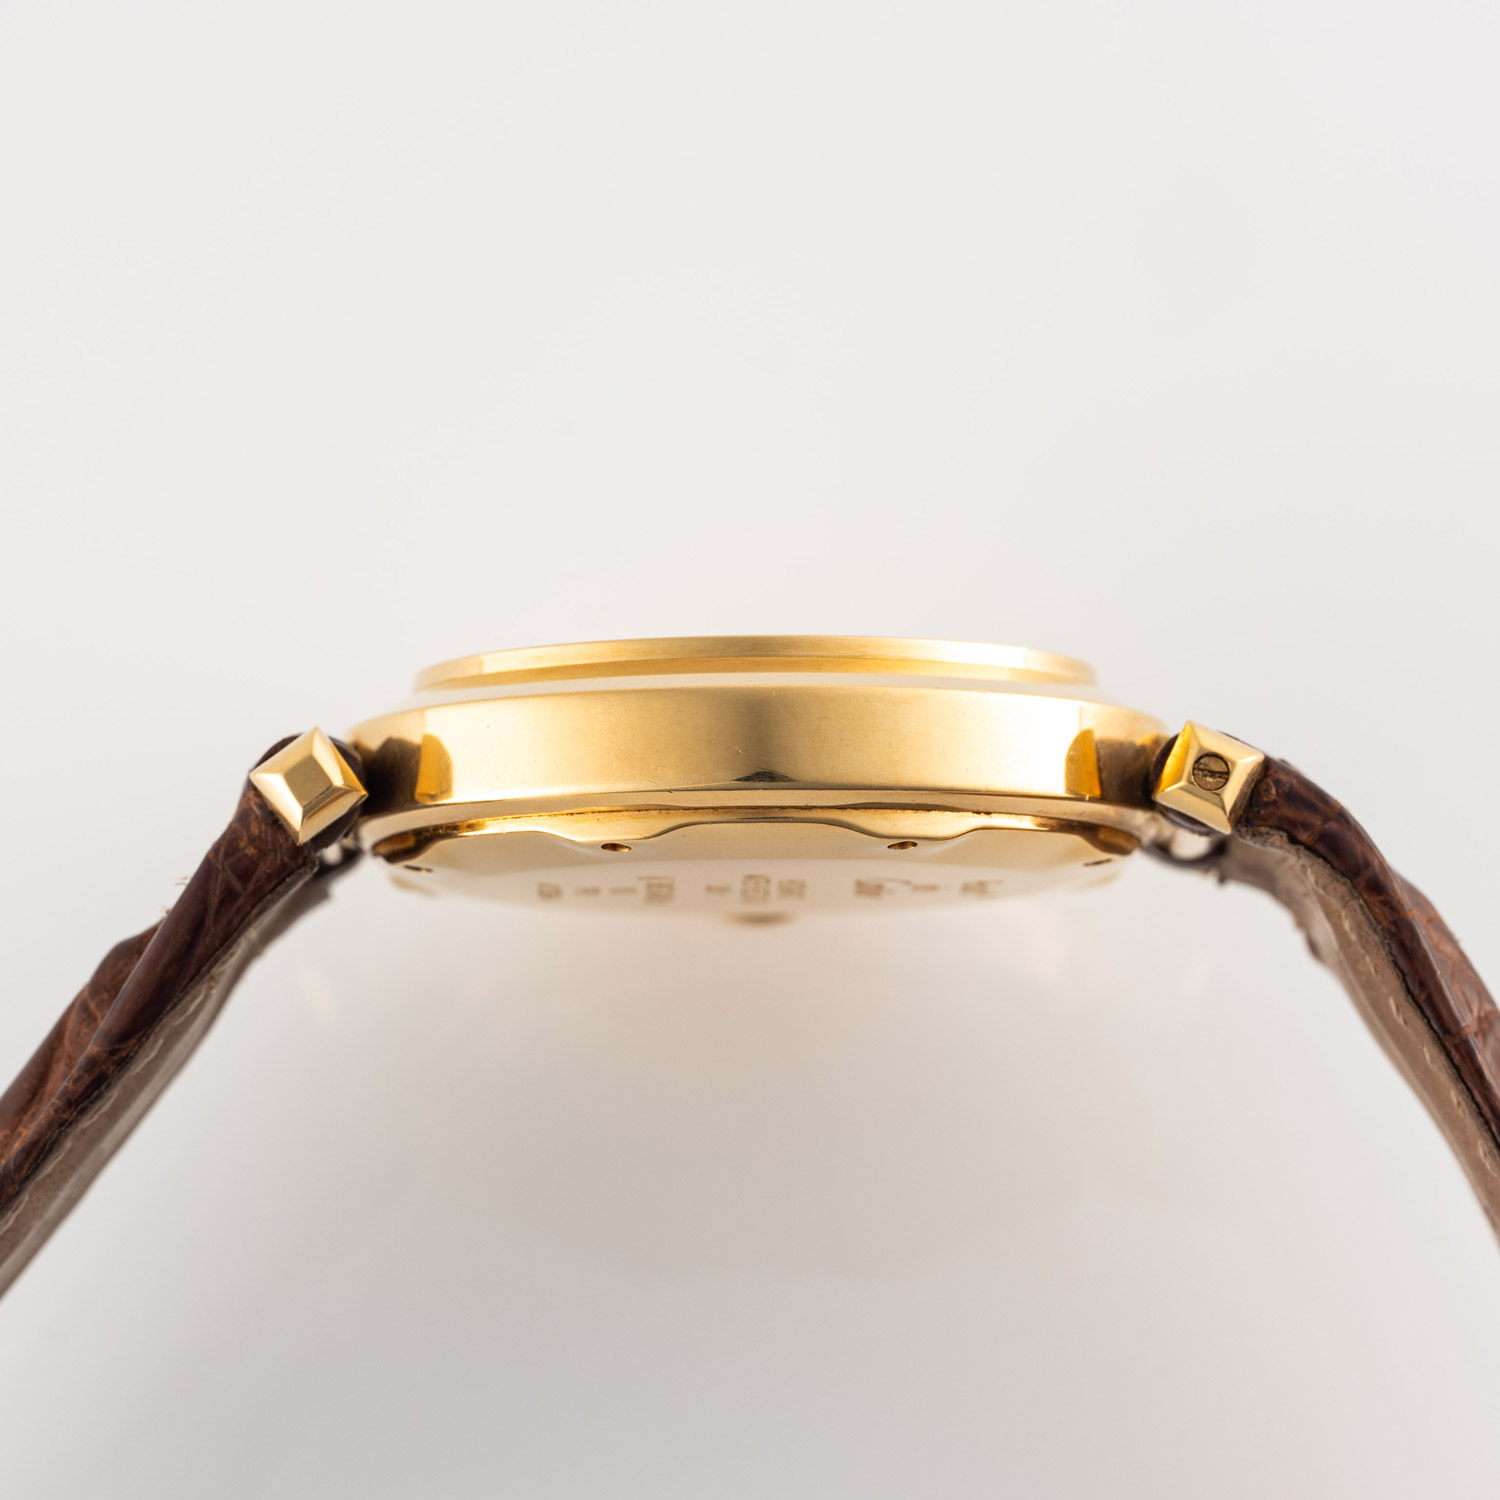 A GENTLEMAN'S SIZE 18K SOLID YELLOW GOLD CARTIER PASHA AUTOMATIC WRIST WATCH CIRCA 1990s, REF. - Image 6 of 7